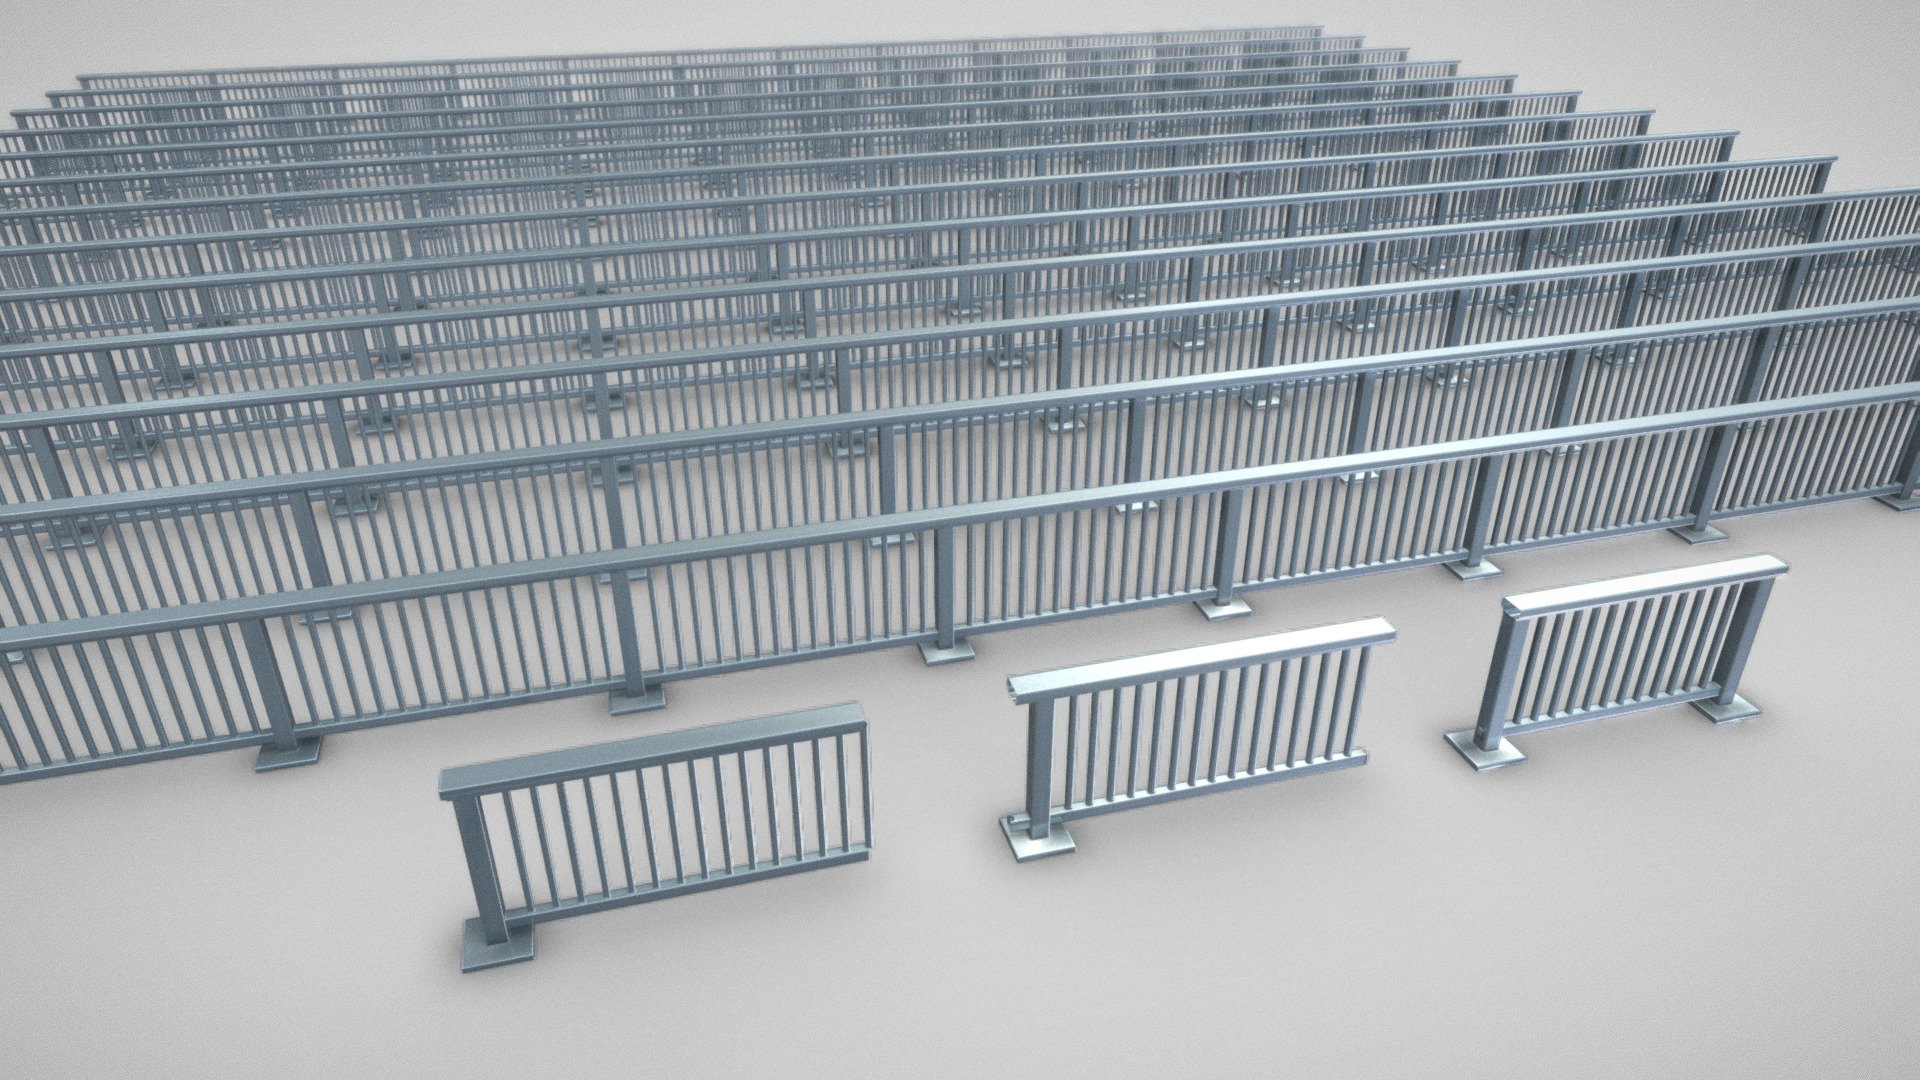 Bridge railings version 2 (array-able).






Bridge Railing [1] |=|=|=|=|=|=|=|=|=|=|=|=|=|





PBR texture maps: 




4096 x 4096 





Modeled and textured by 3DHaupt in Blender-2.82 - Bridge Railing [2] |=|=|=|=|=|=|=|=|=|=|=|=|=|=| - Buy Royalty Free 3D model by VIS-All-3D (@VIS-All) 3d model